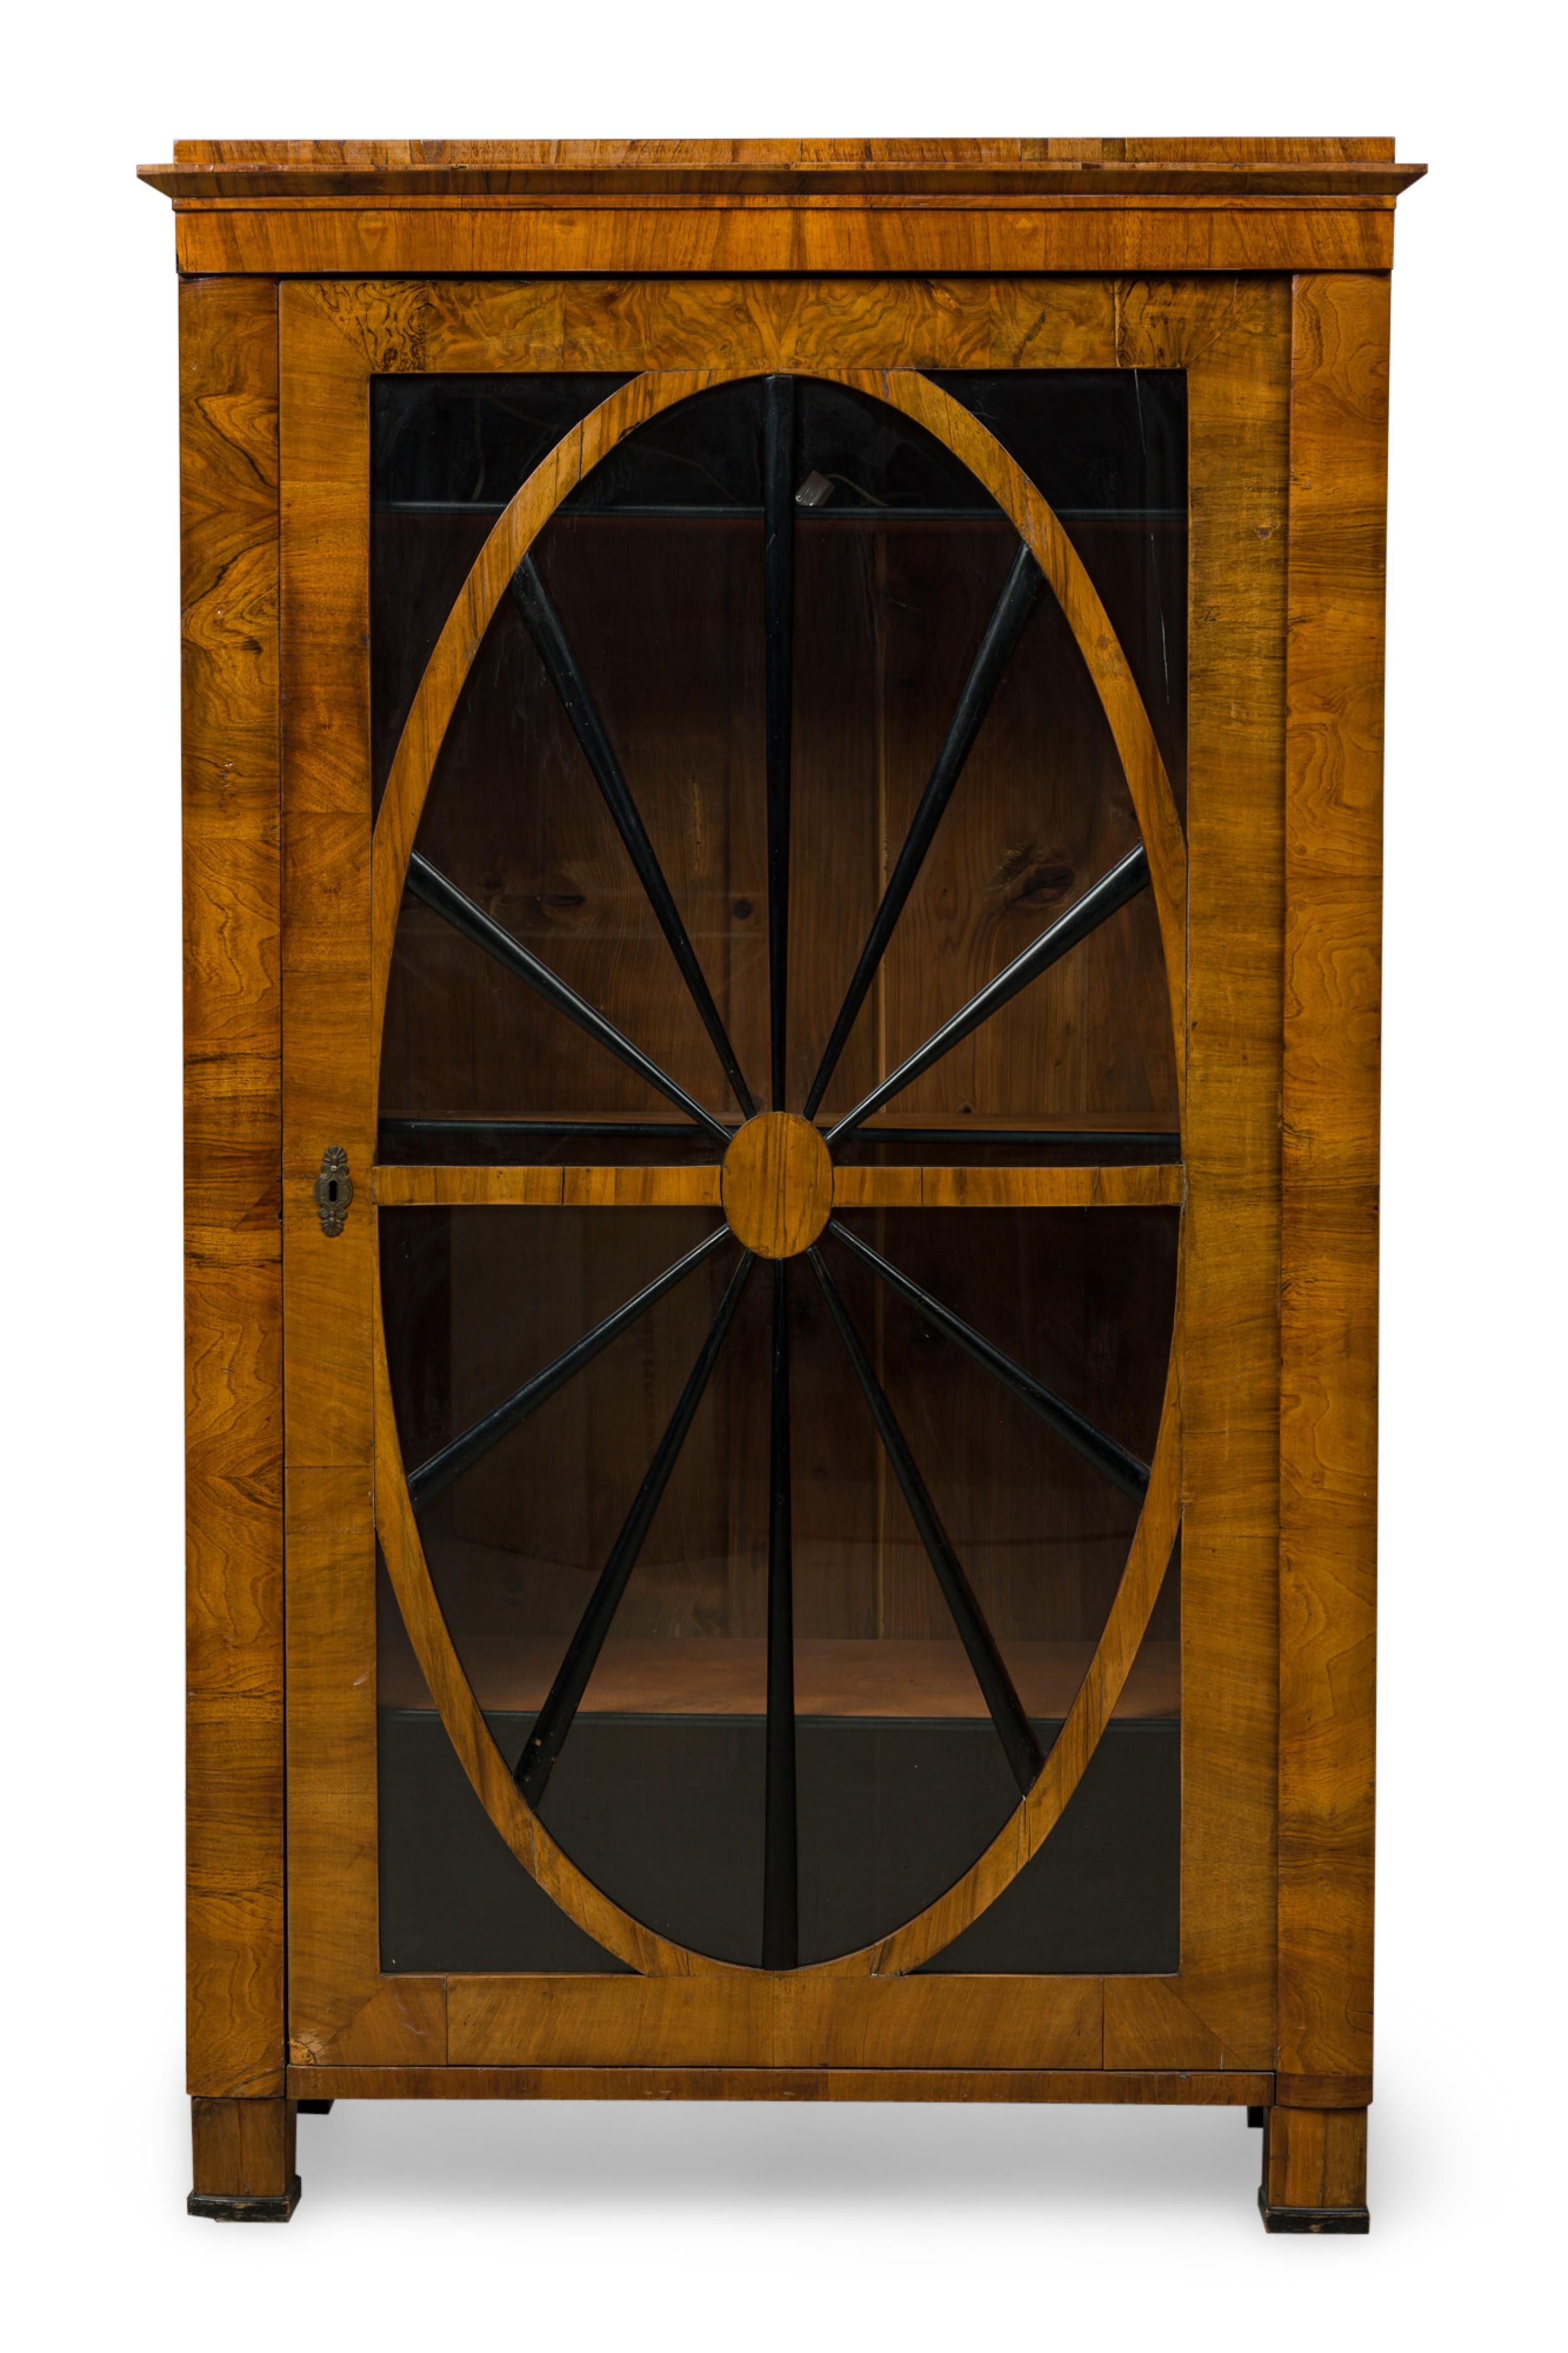 PAIR of Biedermeier (19th Century) walnut bookcase / display cabinets featuring oval glass front doors with an ebonized wheel wood pane design, having three adjustable interior shelves and top-mounted (modern) interior lights, resting on four block